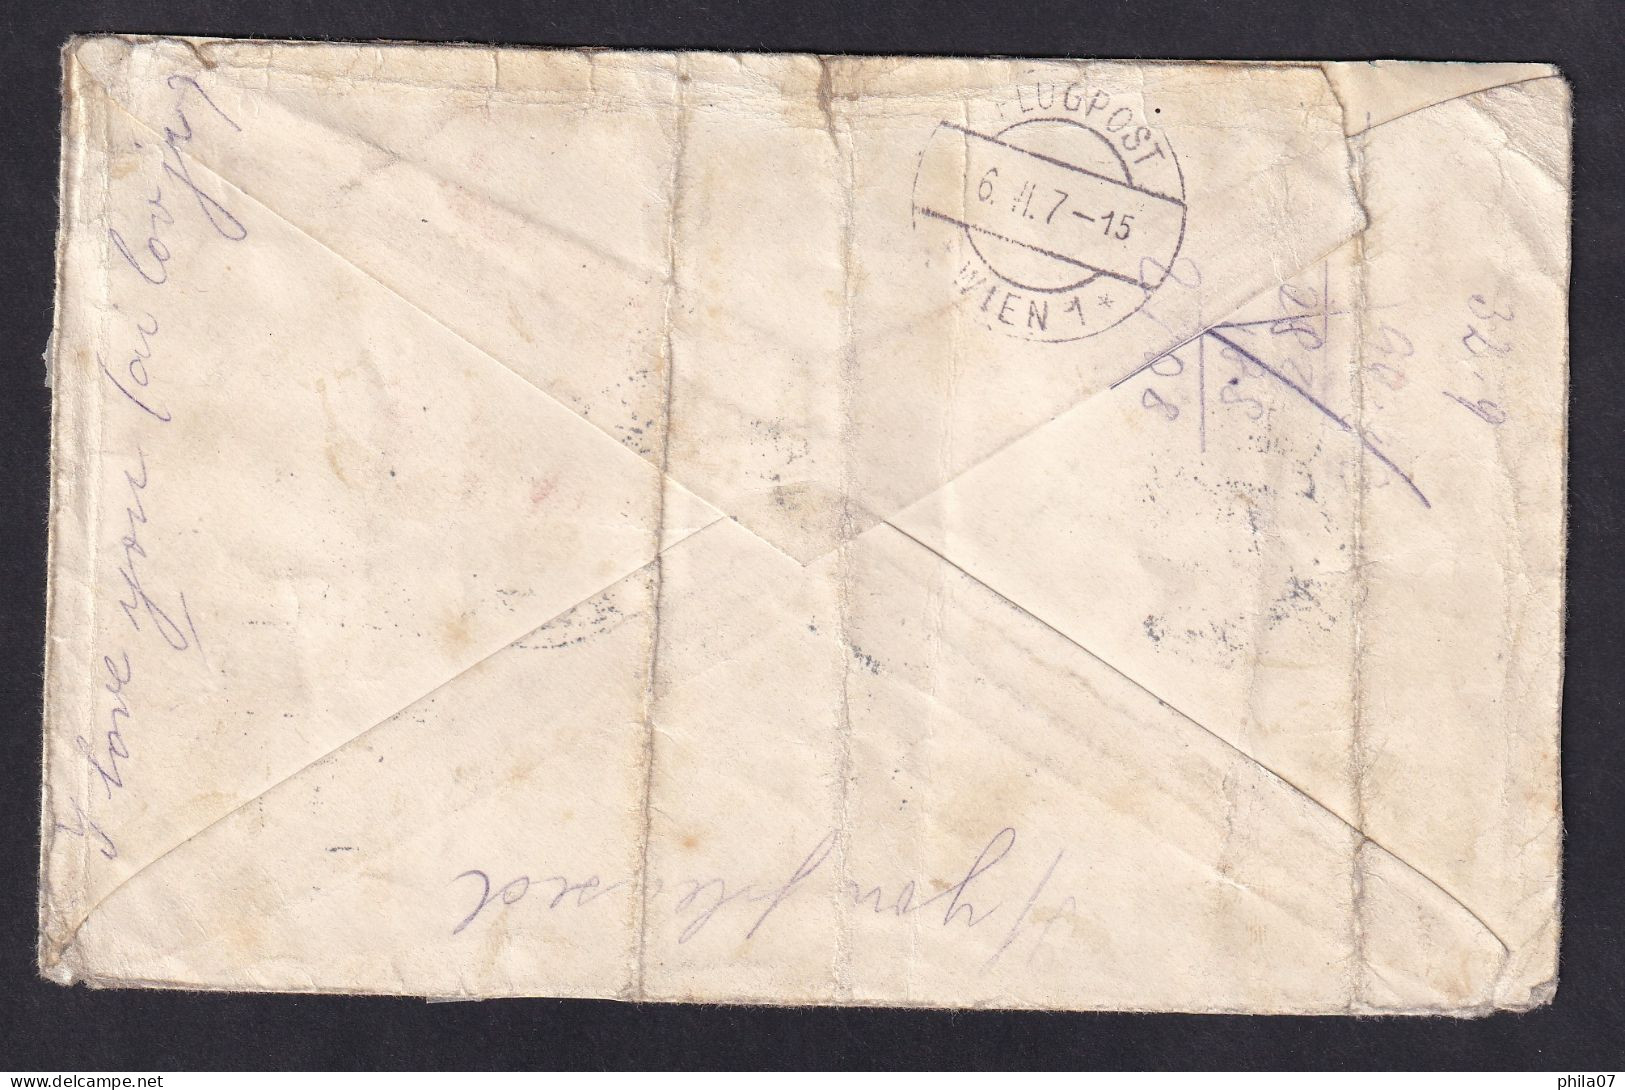 AUSTRIA - Letter Sent By Airmail From Krakow To Wien 06.06.1915. Rare Envelope And In Poorer Quality. / 2 Scans - Lettres & Documents